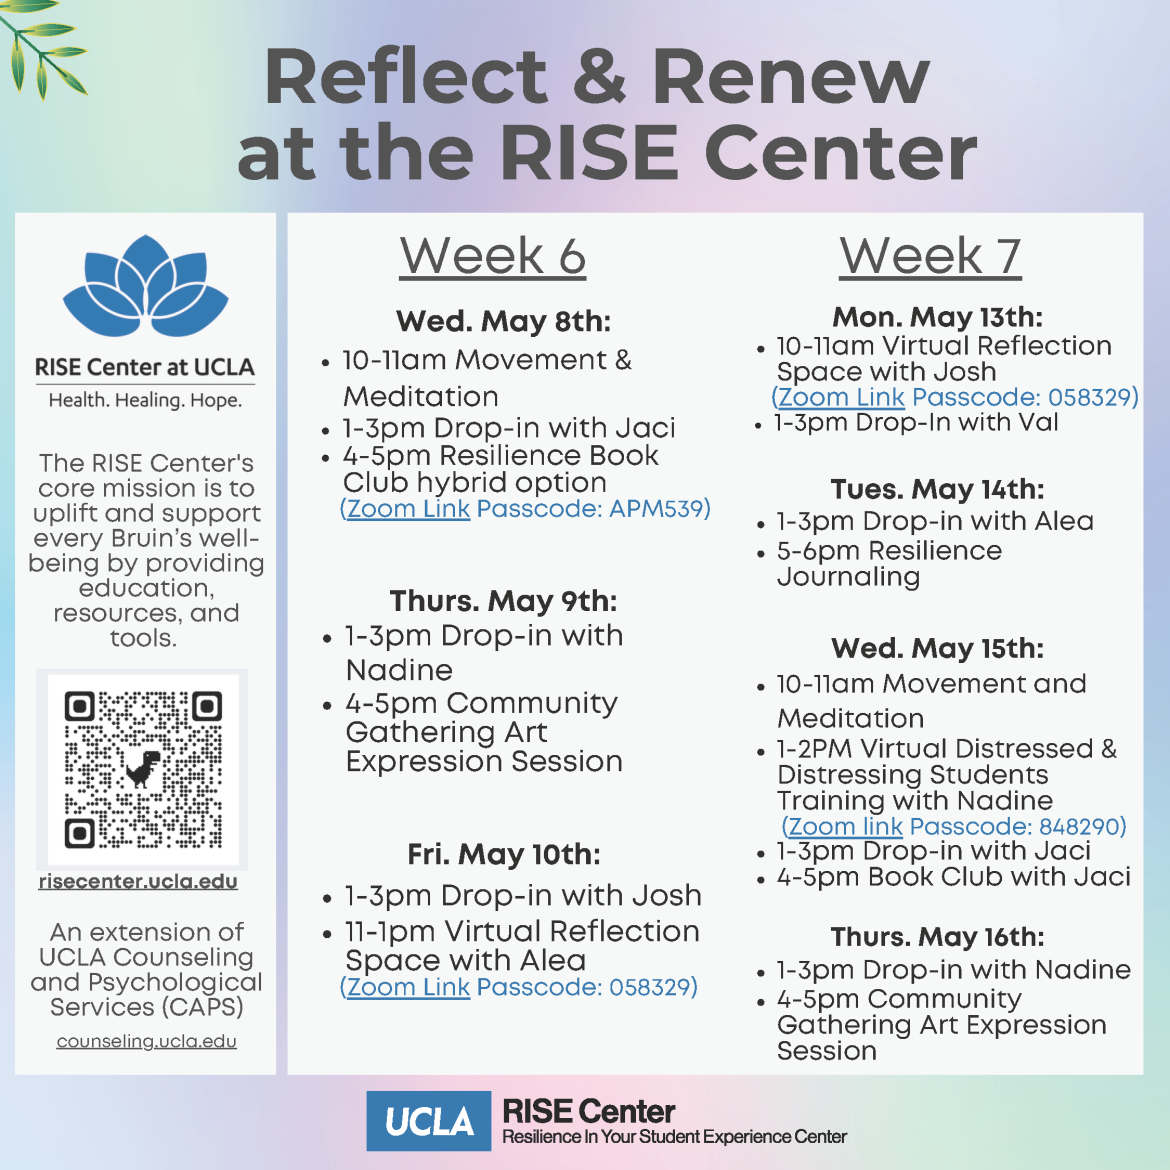 Flyer with information on events that are happening at RISE. It includes movement and meditation times, drop-ins, and other support spaces for students. These will be happening Week 6 and 7